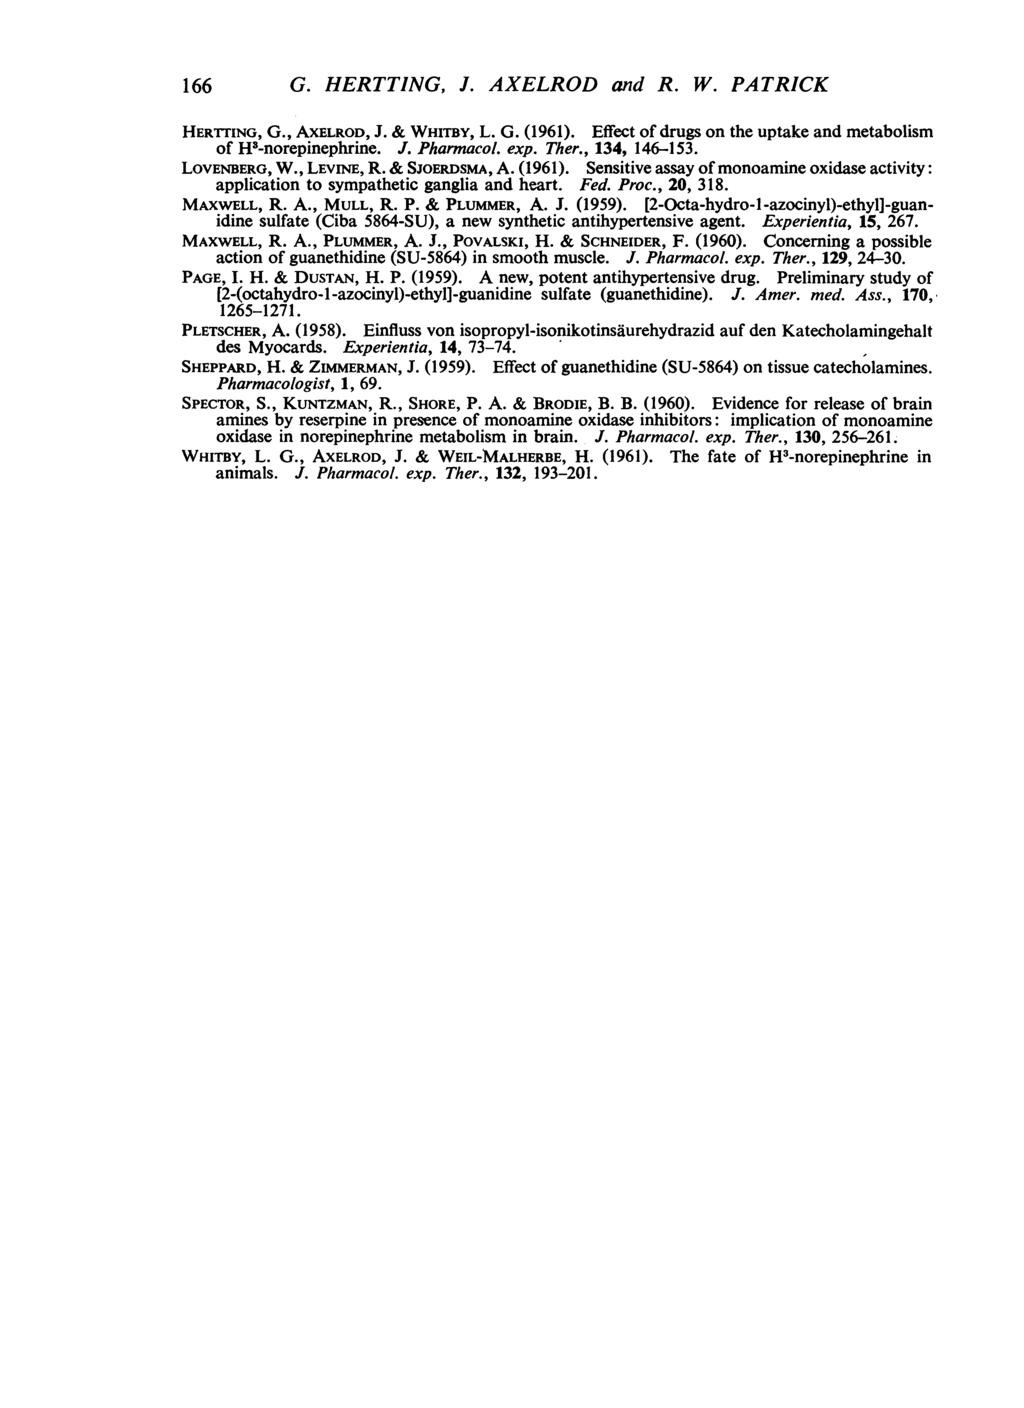 166 G. HERTTING, J. AXELROD and R. W. PATRICK HERTTING, G., AXELROD, J. & WHITBY, L. G. (1961). Effect of drugs on the uptake and metabolism of H3-norepinephrine. J. Pharmacol. exp. Ther.